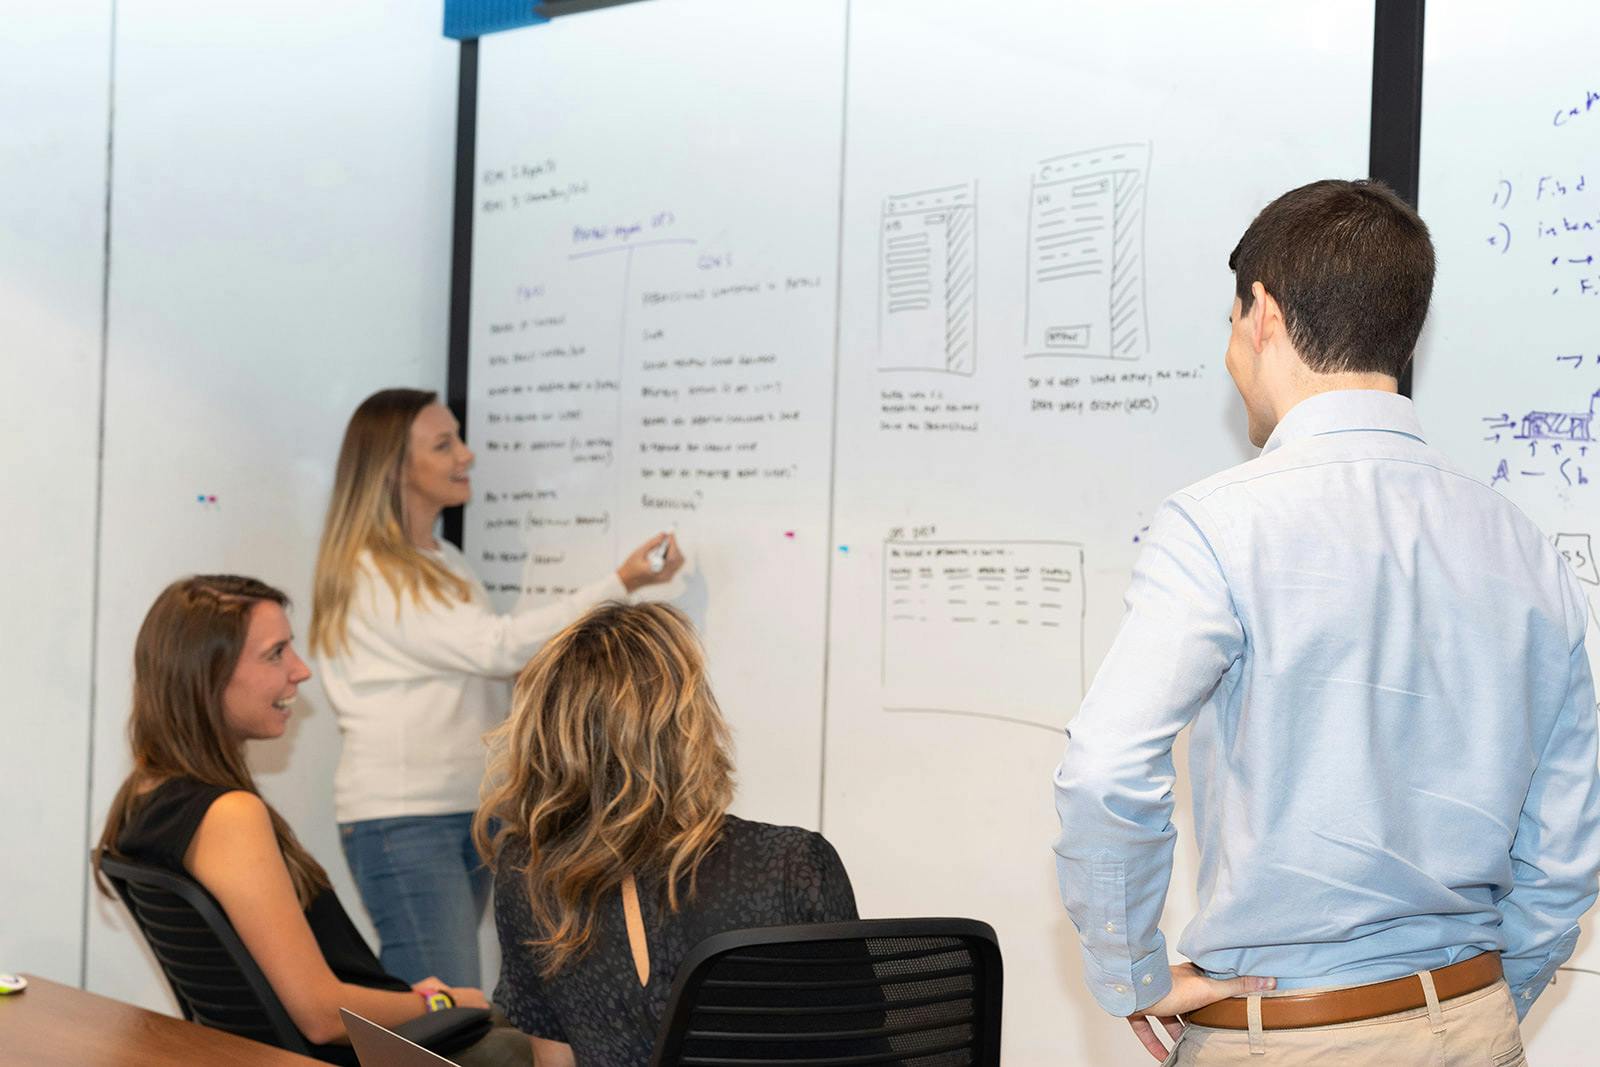 Woman writing on whiteboard with coworkers looking on